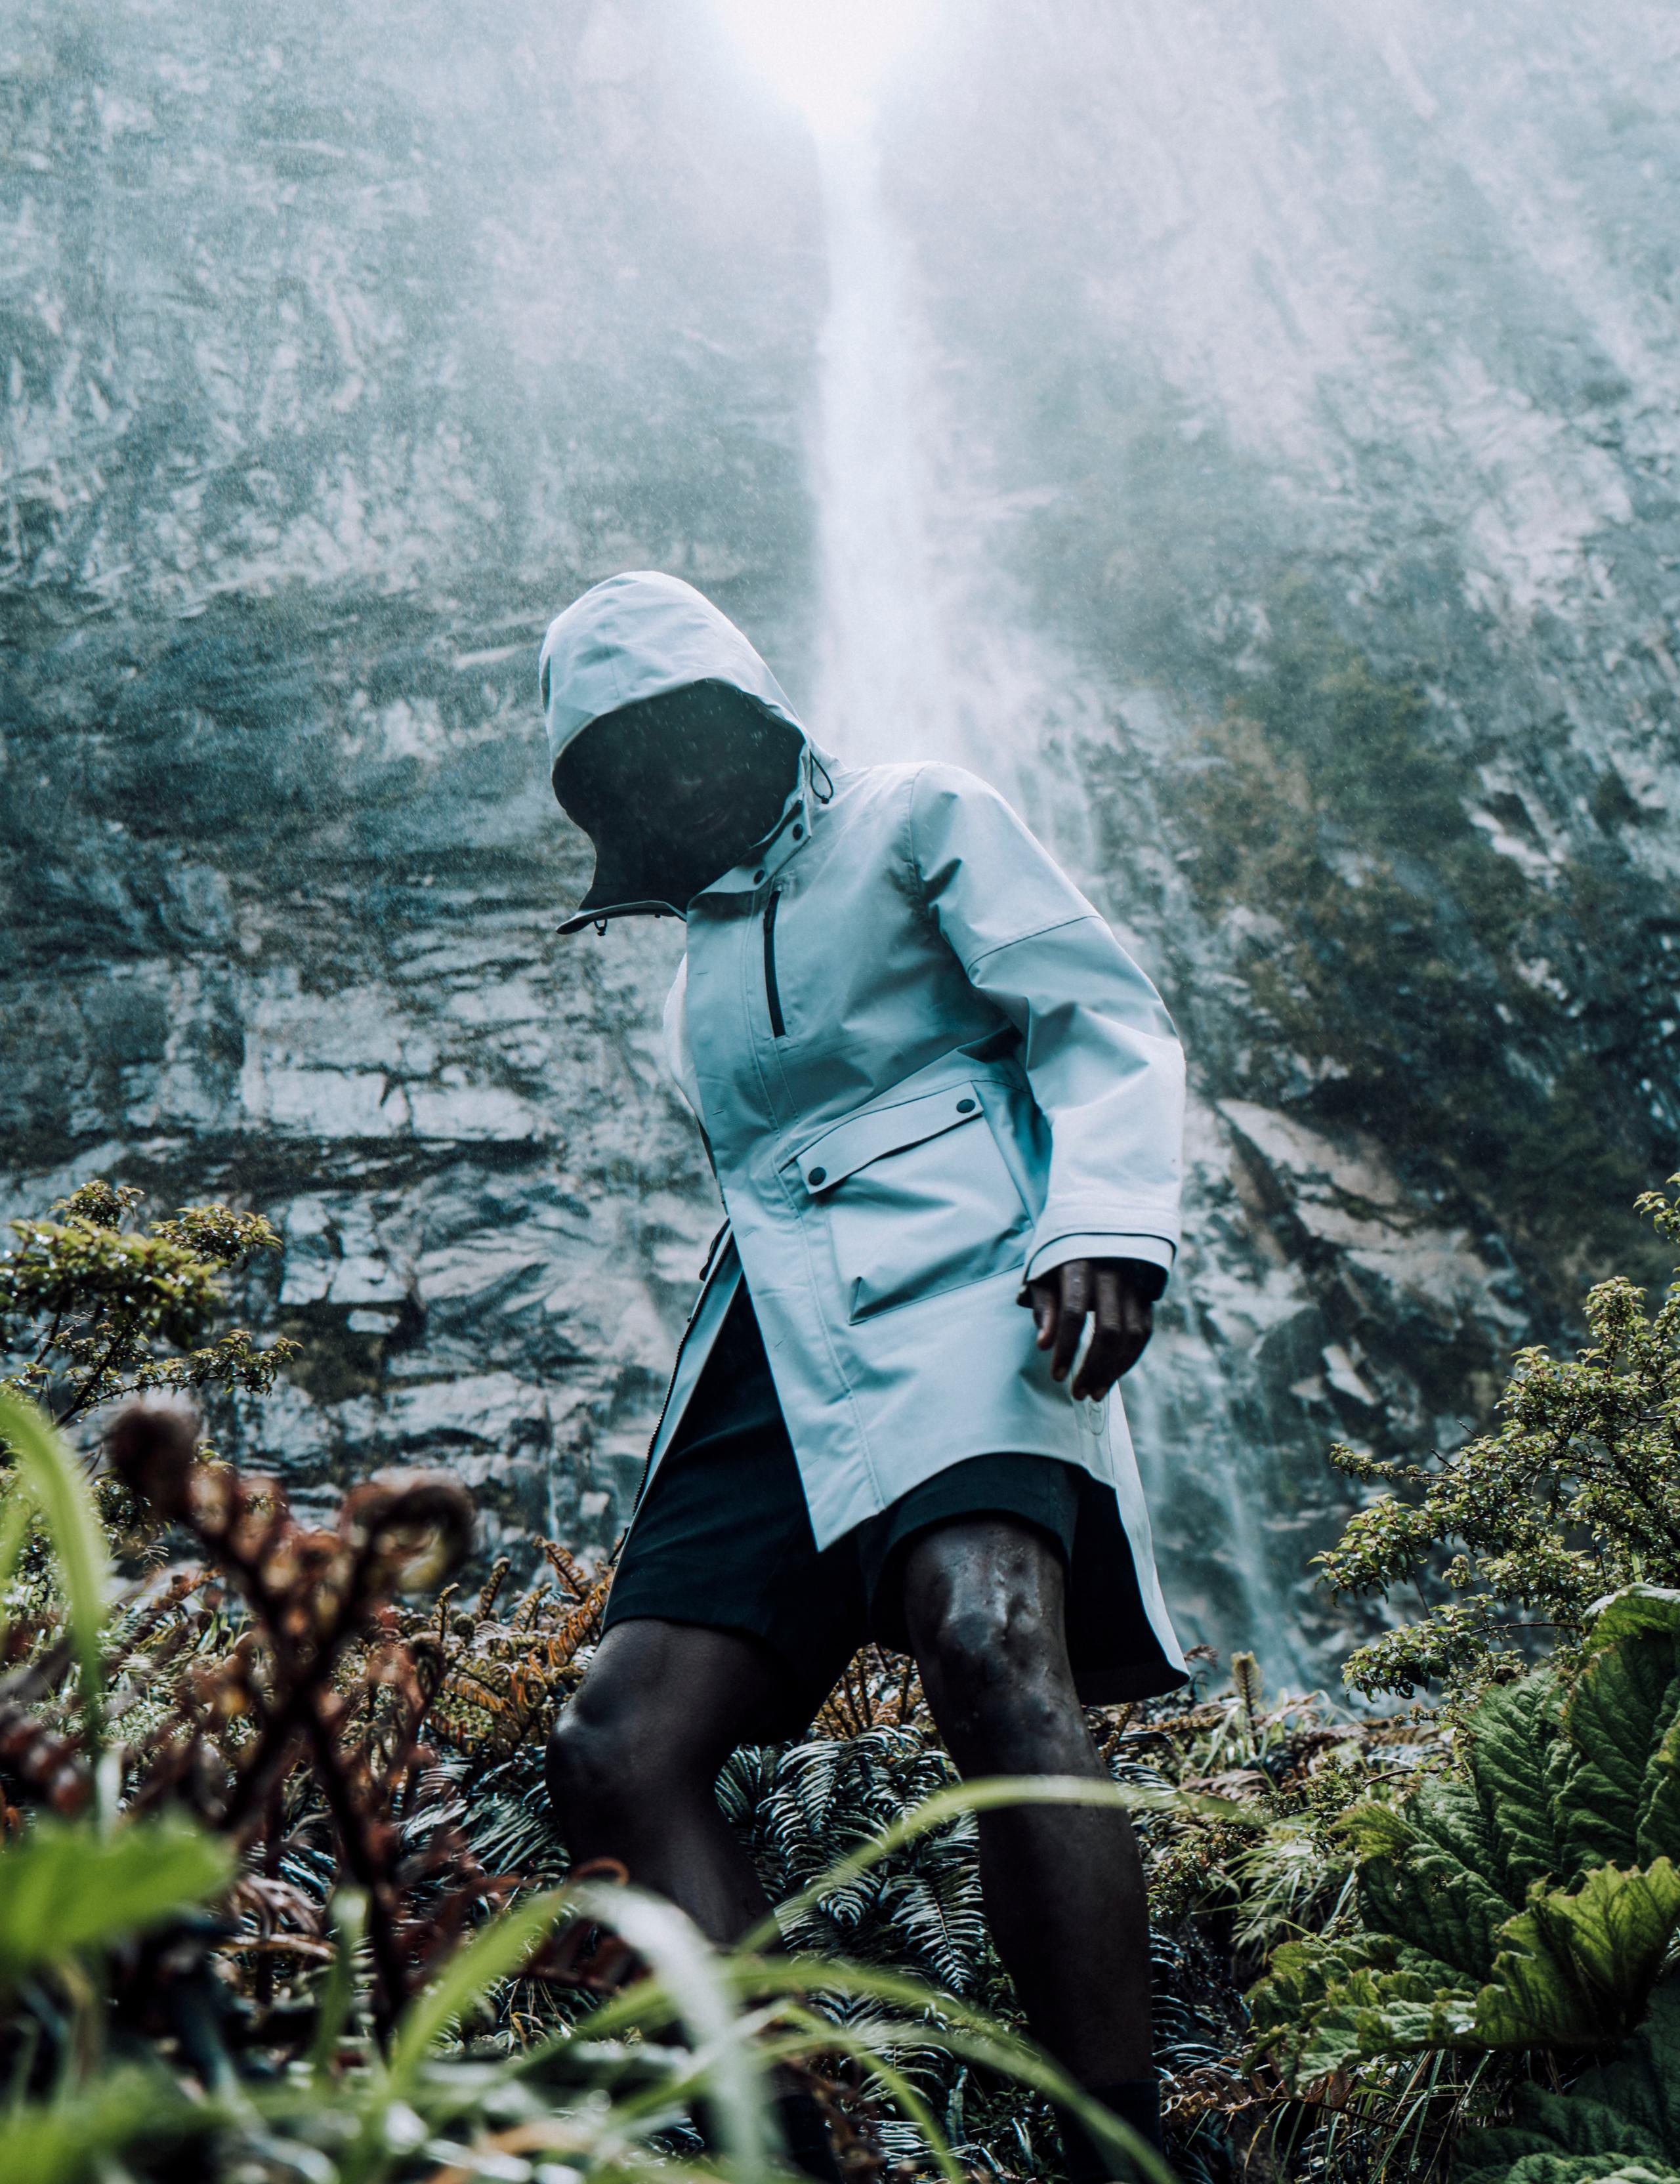 Man in Anders Rain Jacket walking through forest with waterfall in background in Patagonia